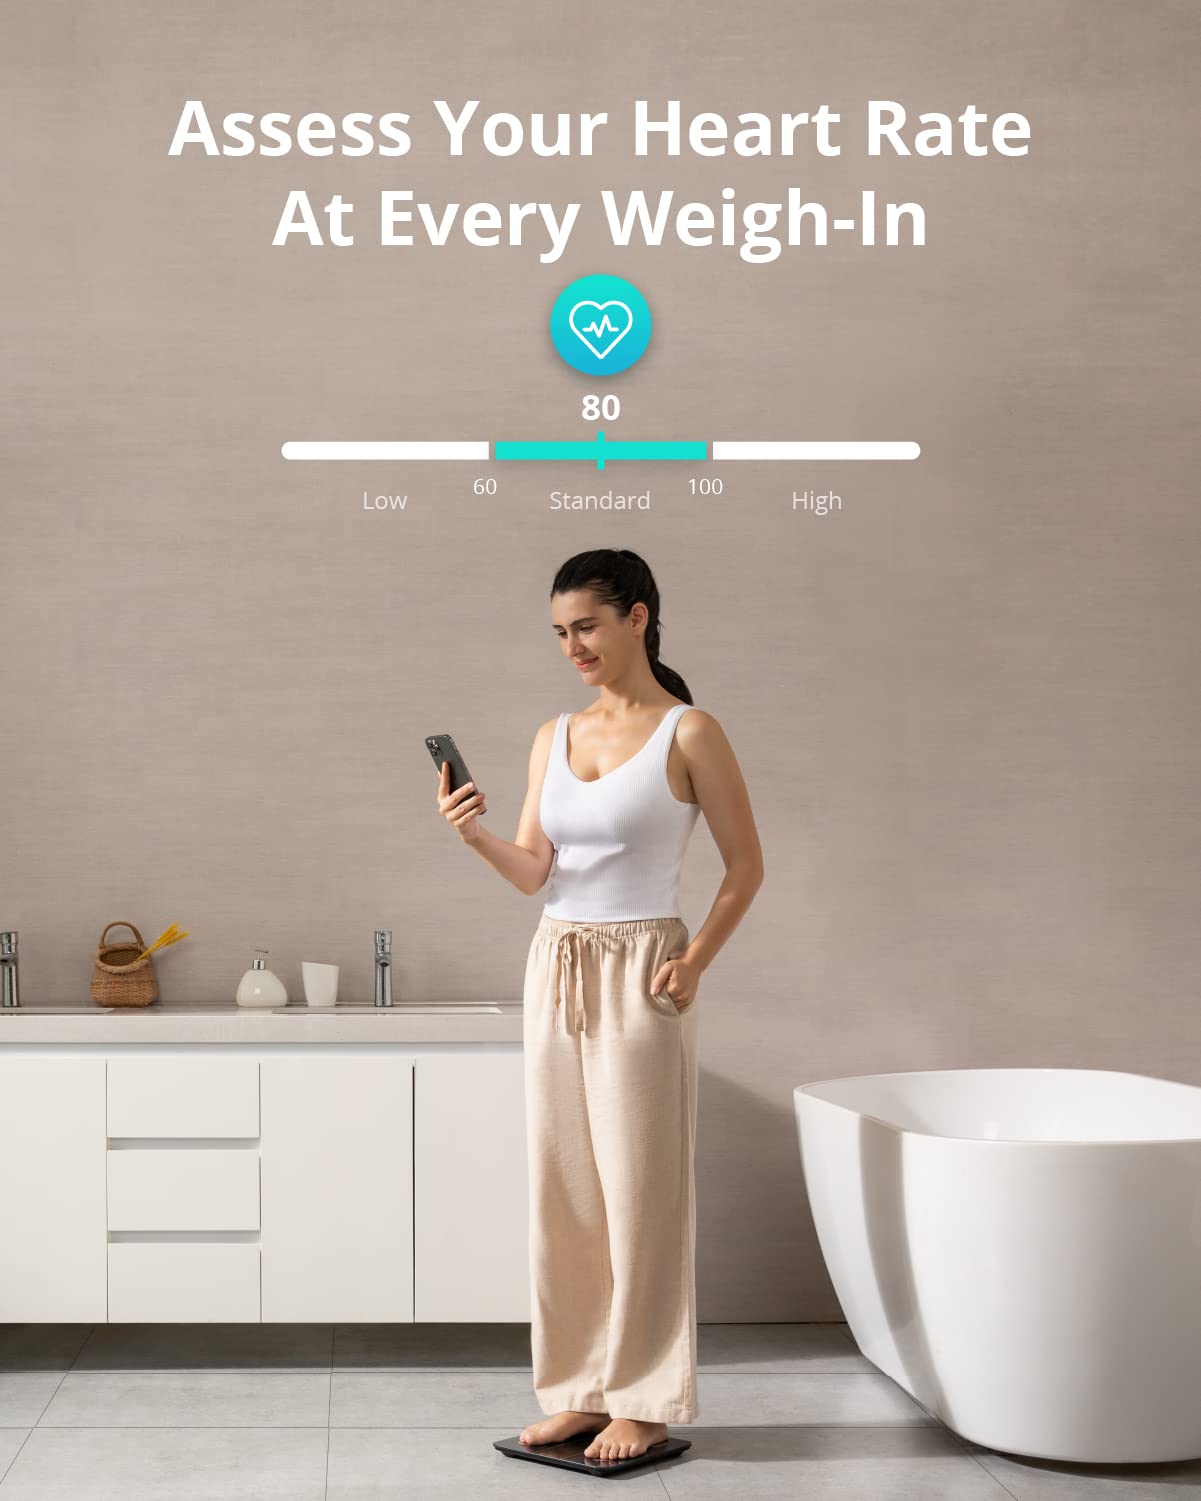 eufy Smart Scale P2 Pro, Weight Scale with Wi-Fi, Bluetooth Weighning Scale, 16 Measurements Including Weight, Heart Rate, Body Fat, BMI, Muscle & Bone Mass, 3D Virtual Body Mode, 50 g/0.1 lb